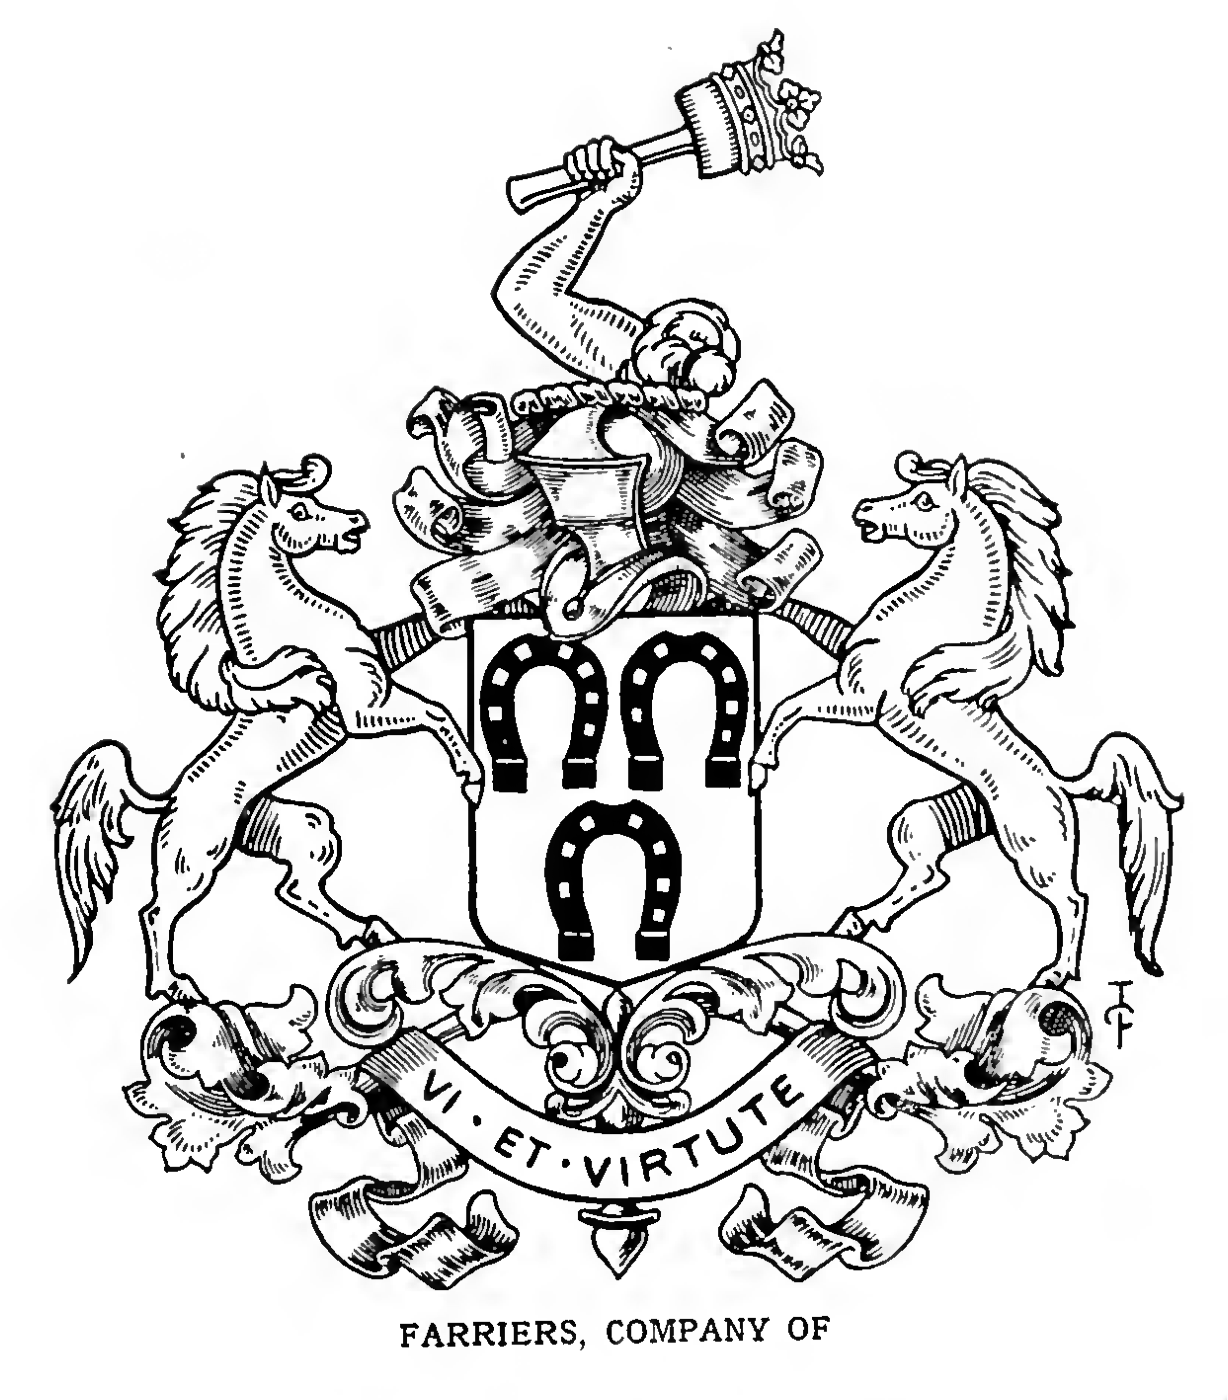 FARRIERS, The Worshipful Company of (London).